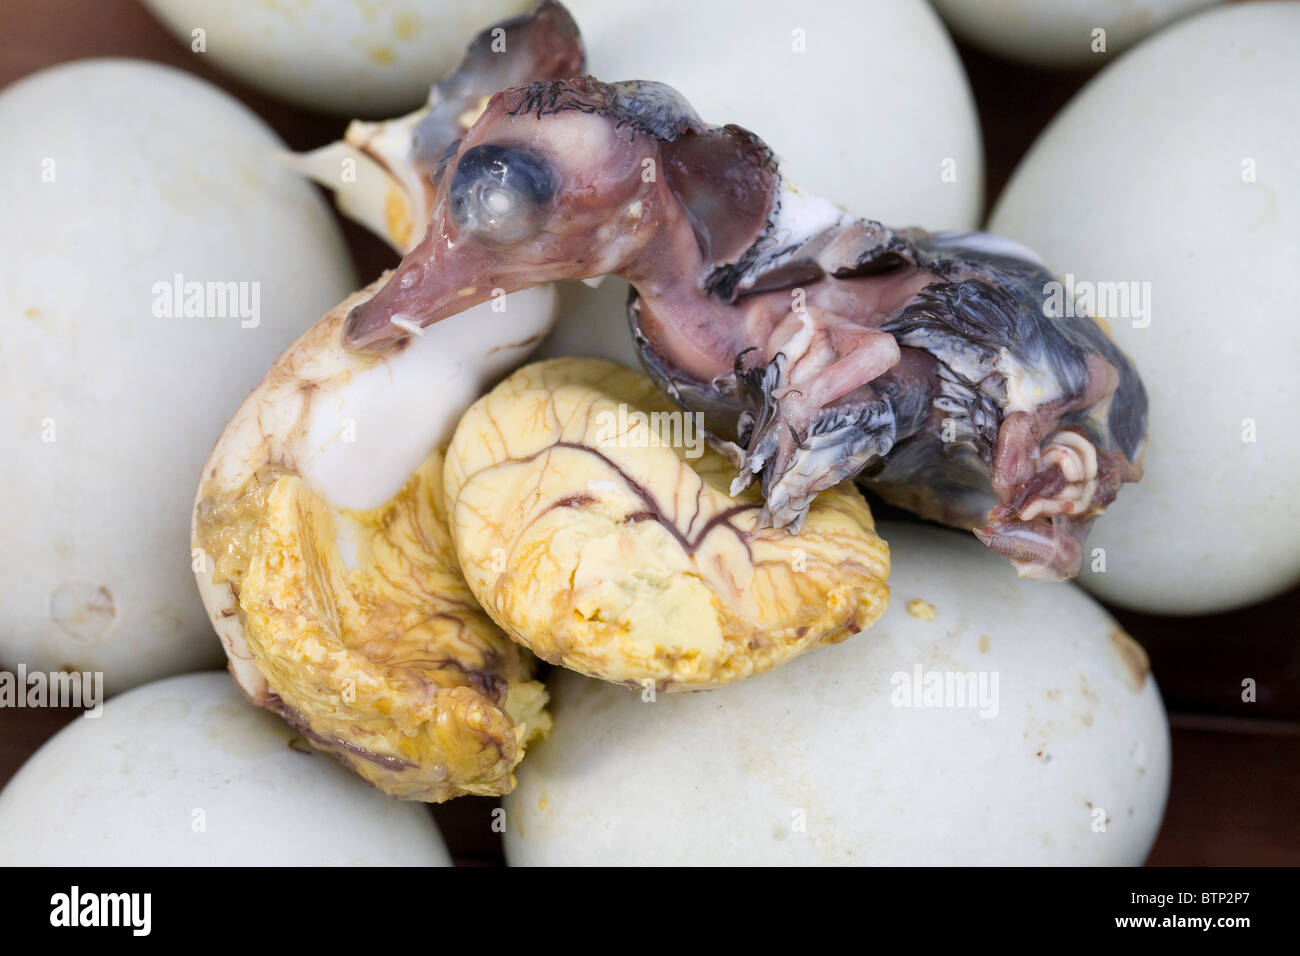 the-exposed-embryo-from-a-balut-or-boiled-fertilized-duck-egg-pictured-BTP2P7.jpg